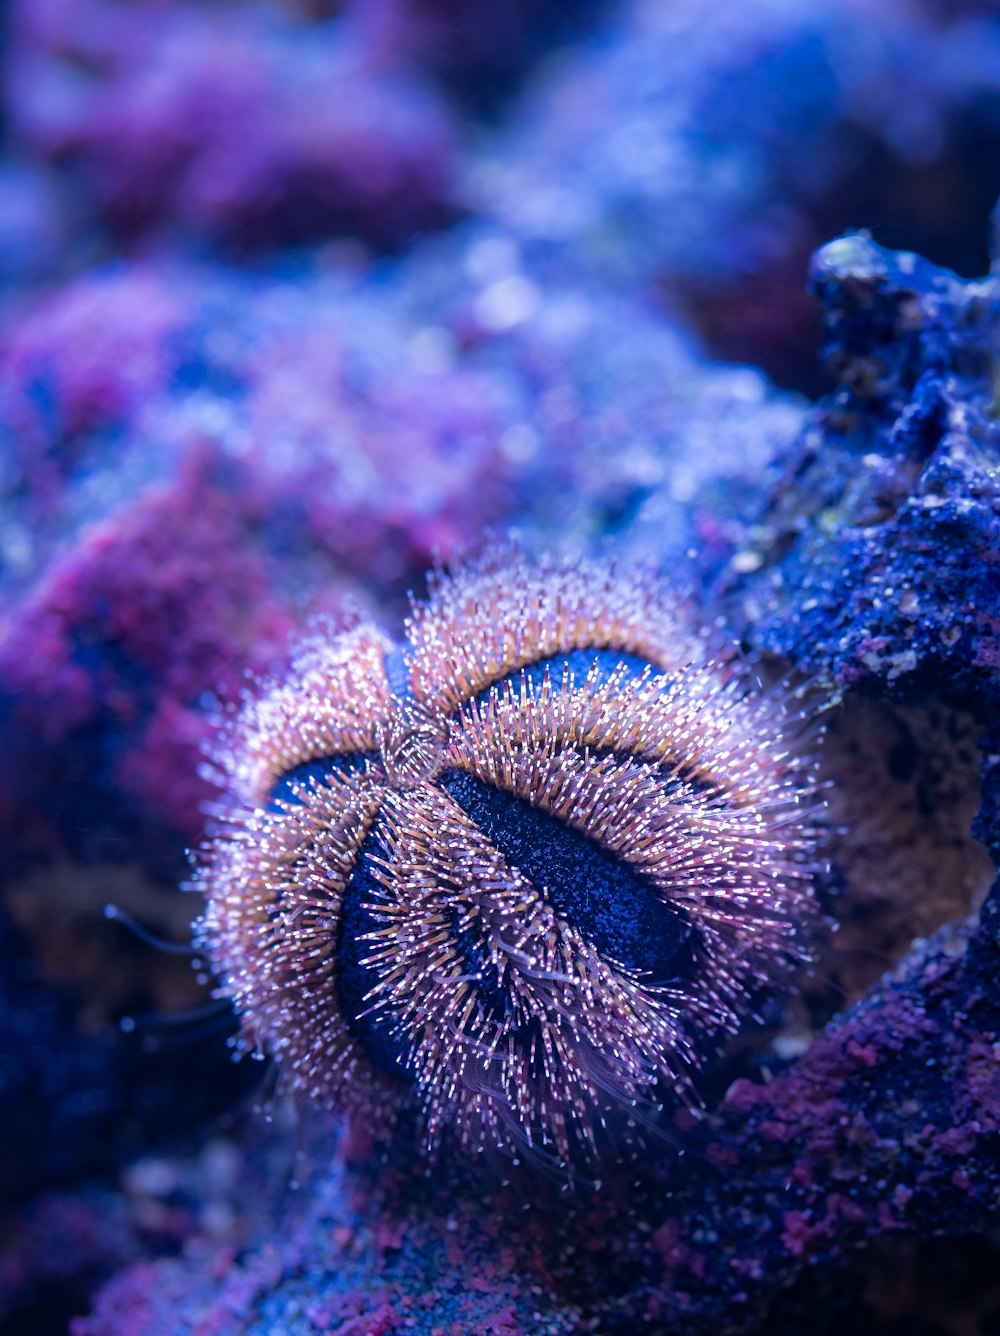 a close up of a purple and blue sea urchin